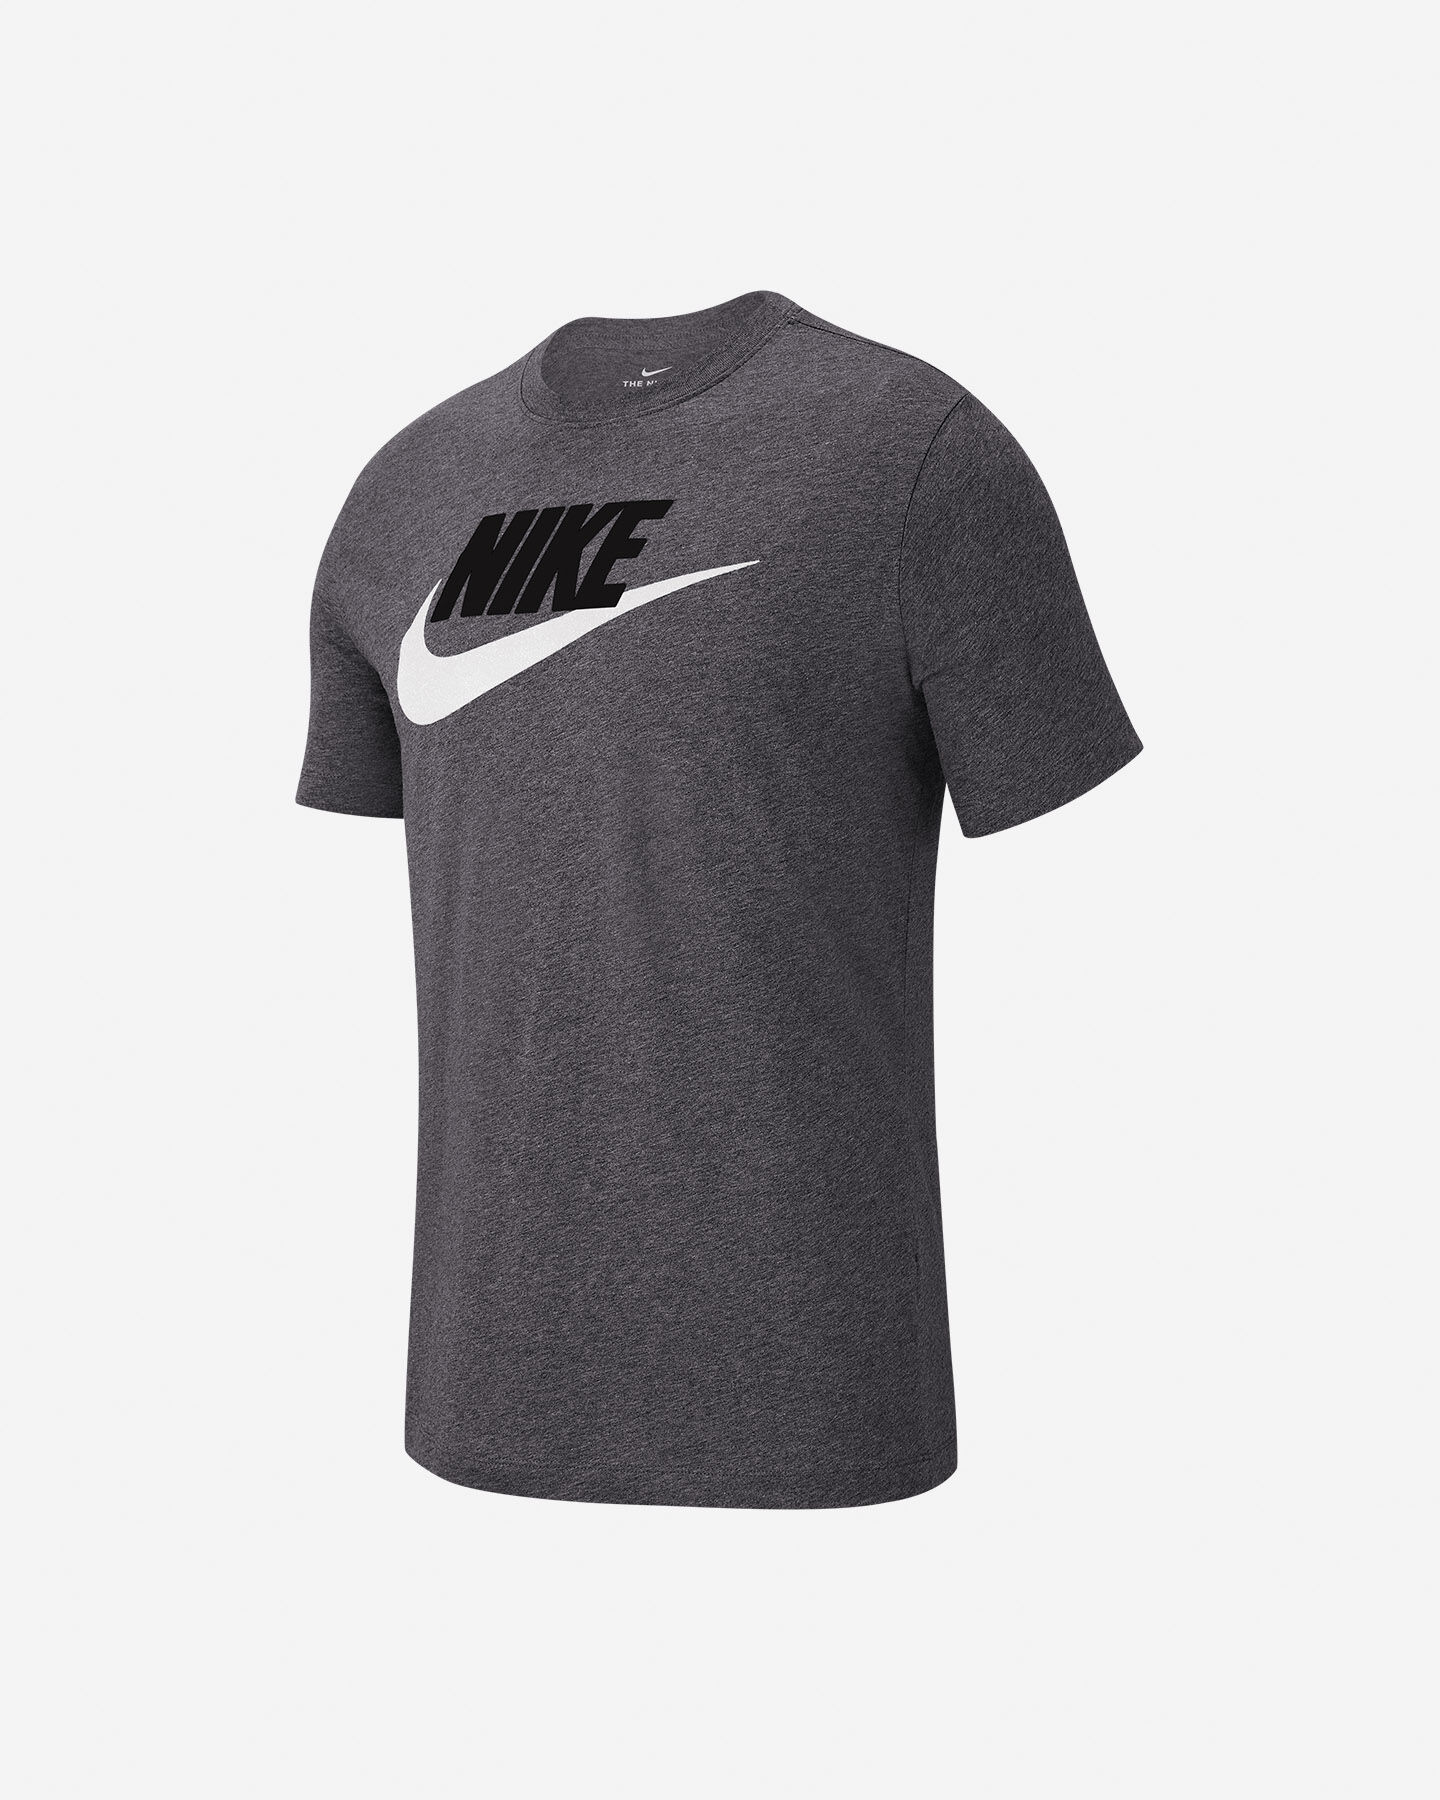 nike t shirt sport buy clothes shoes online